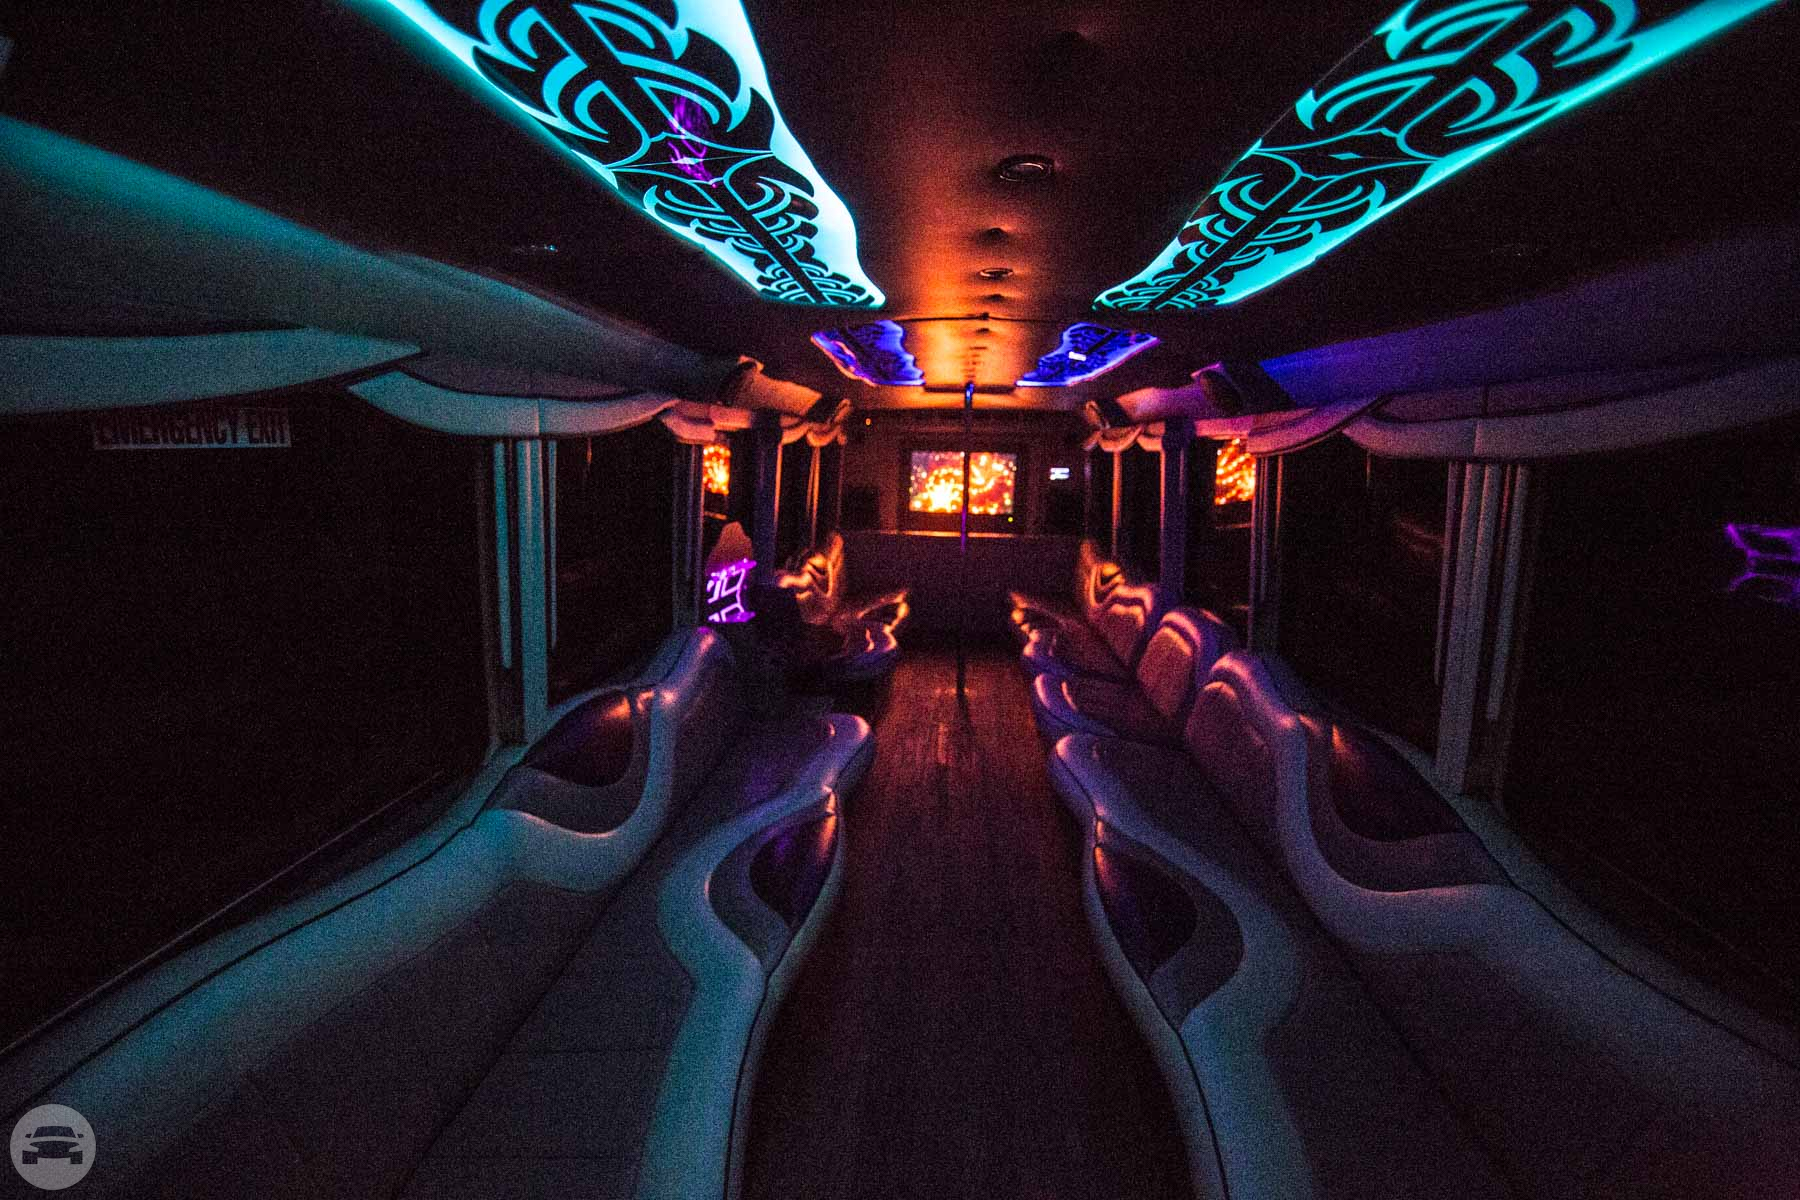 28 to 30 Passenger Limo / Party Bus
Party Limo Bus /
Peachtree Corners, GA

 / Hourly $160.00
